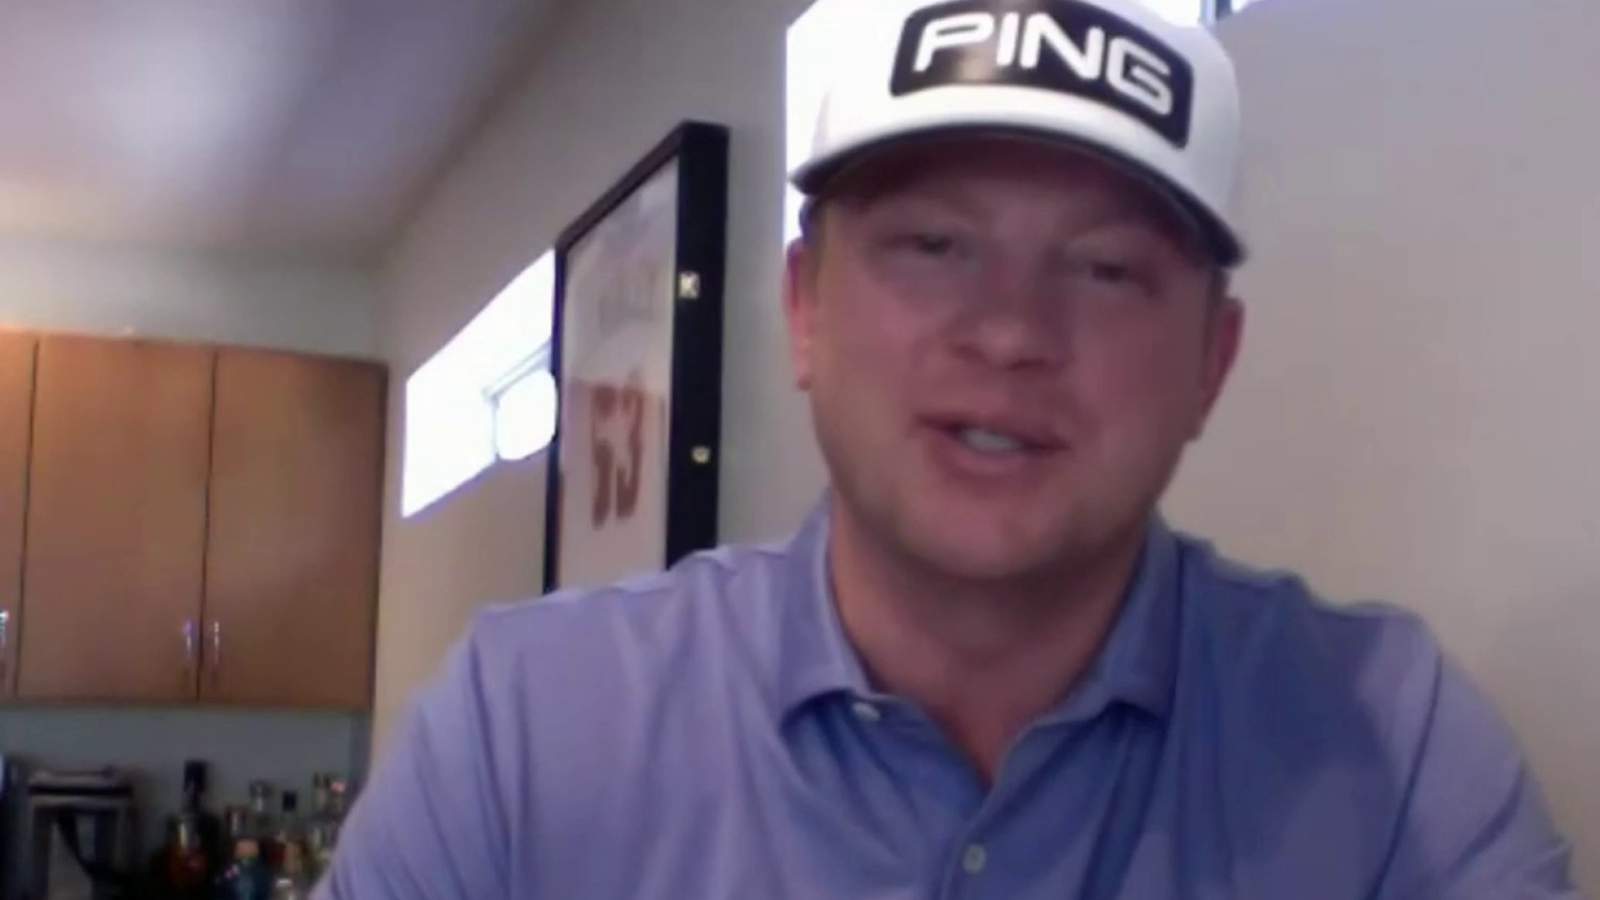 Benched: PGAs Nate Lashley on return to golf without fans and defending his title in Detroit